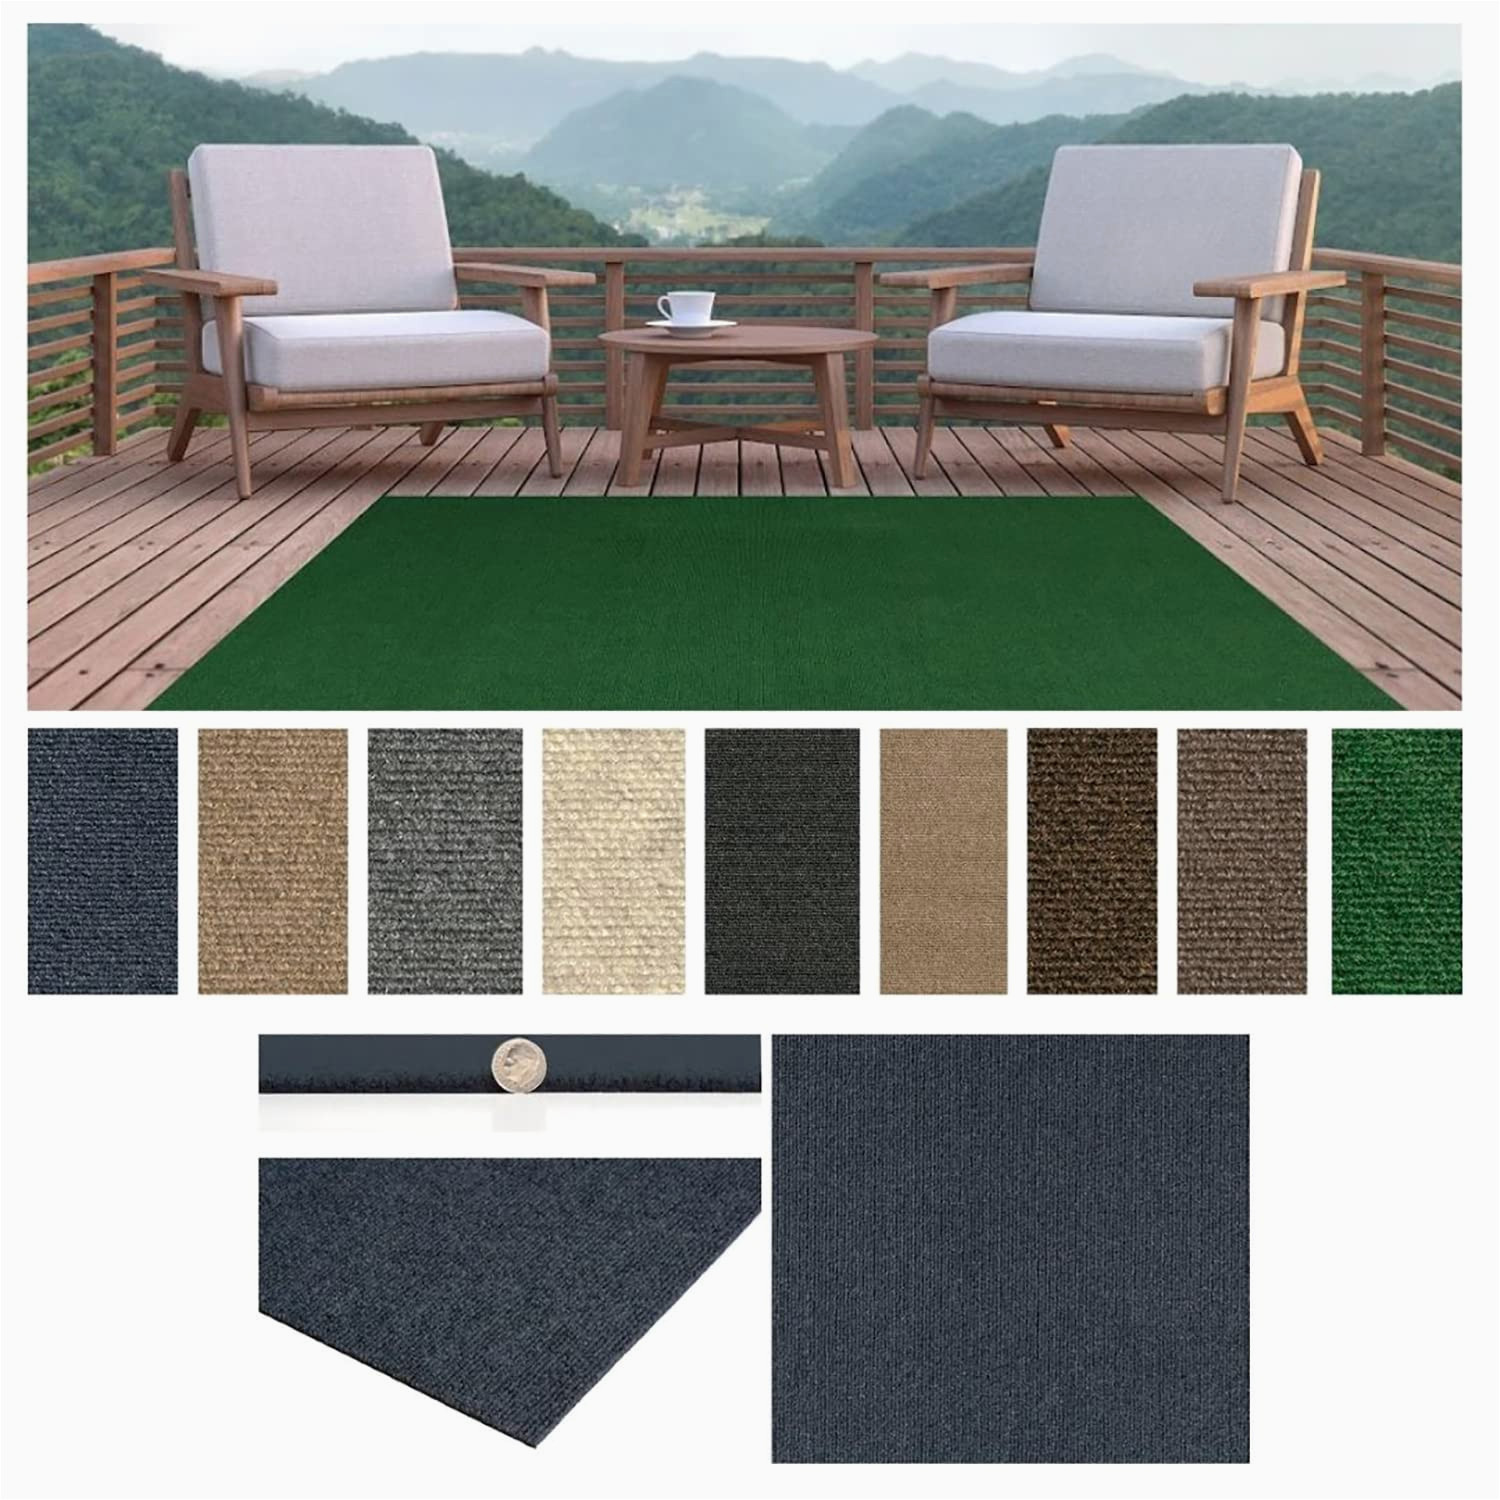 Made to order area Rugs Custom Sized and Made-to-order Thin and Light Weight Indoor / Outdoor area Rugs Balcony Porch Garage Deck Trade Shows events Doormats. Click Customize …